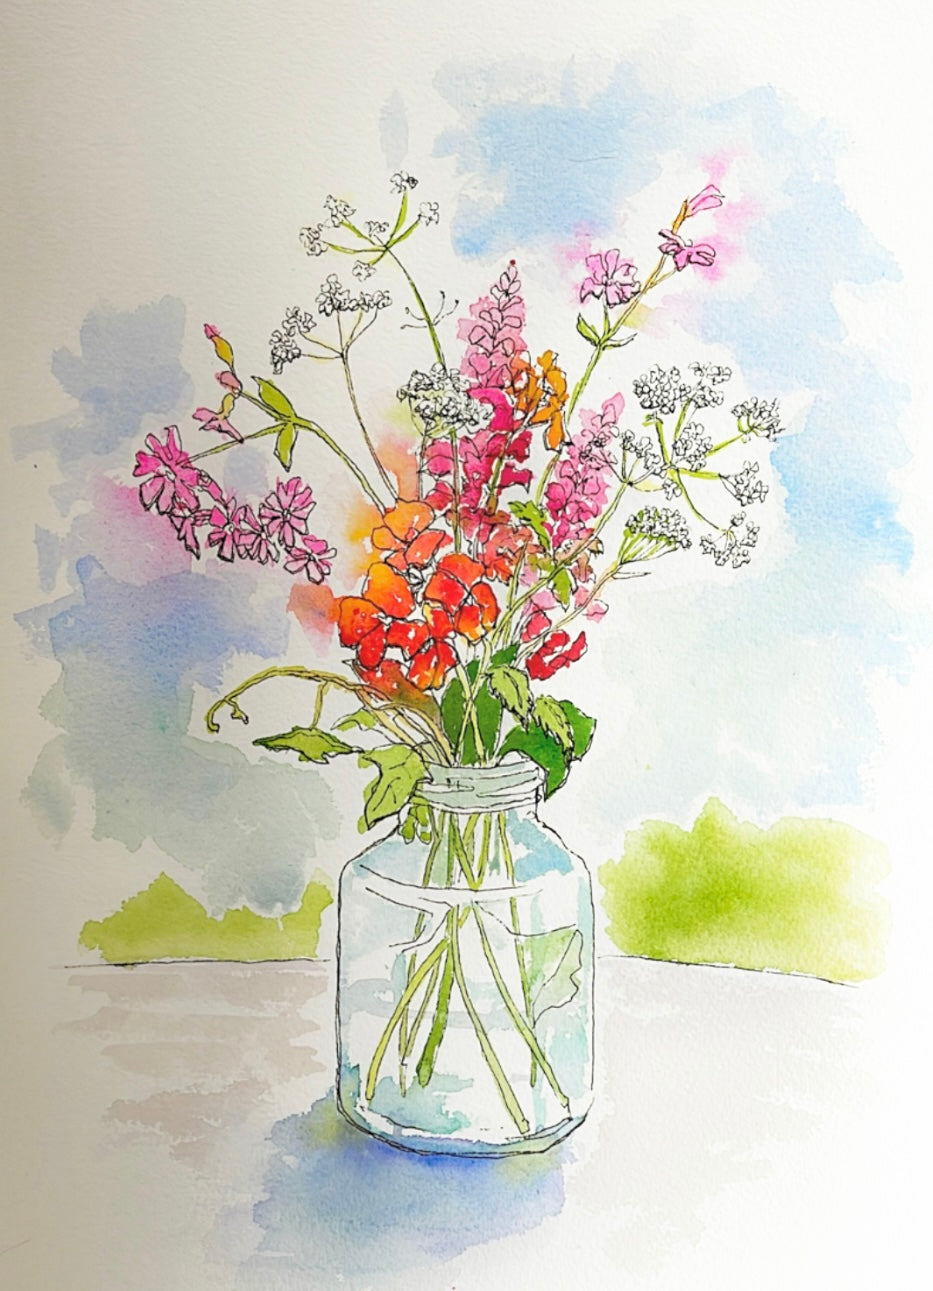 Line and wash watercolour sketch of wildflowers in a jar